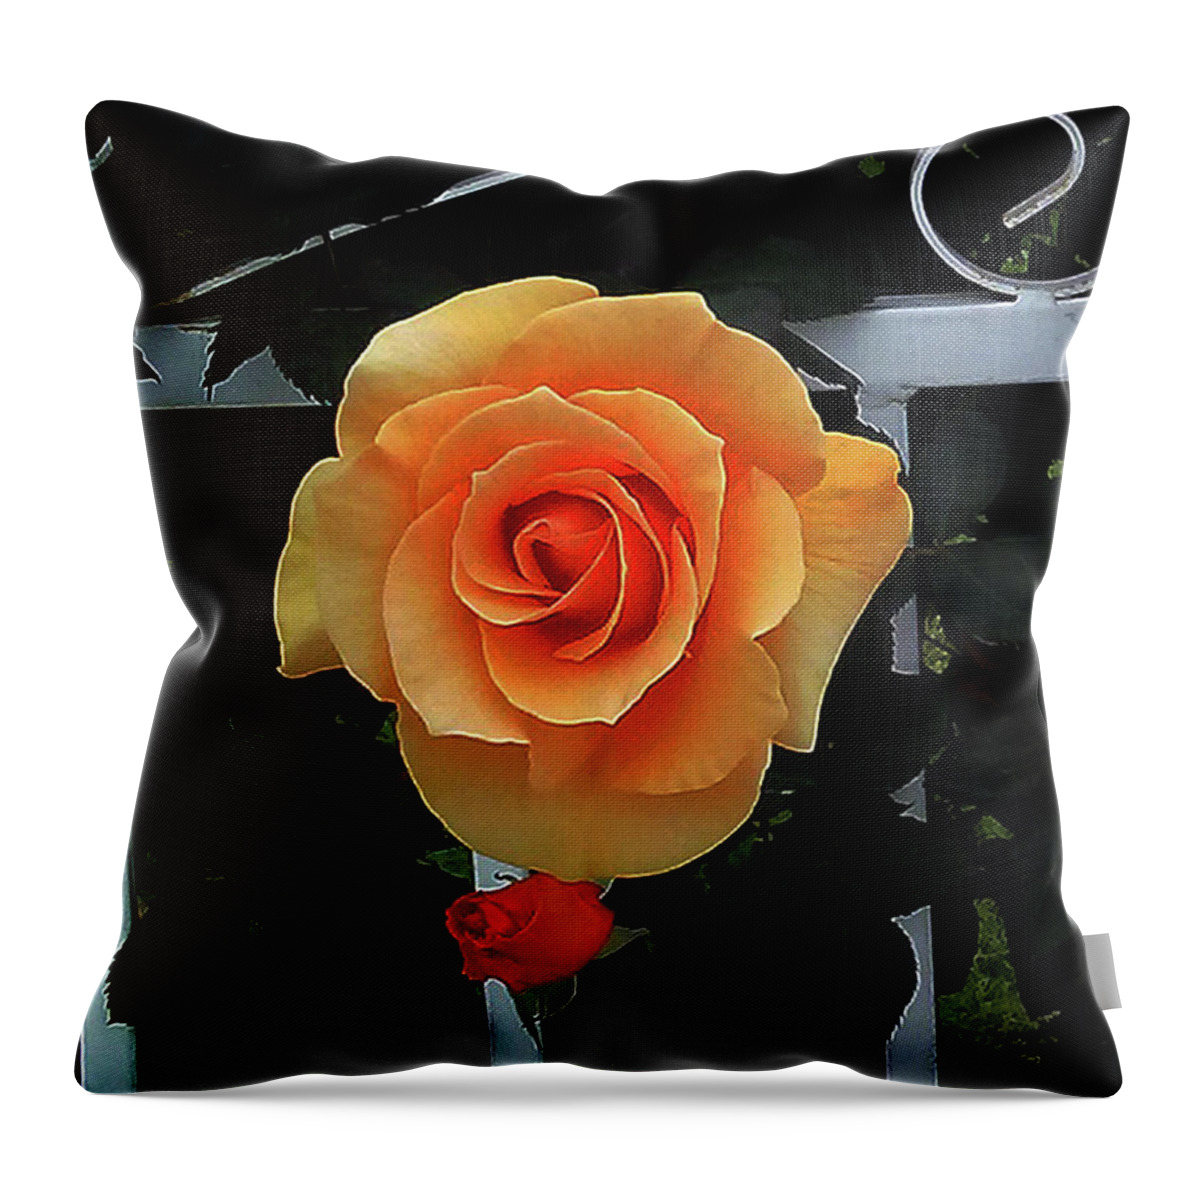 Flower Throw Pillow featuring the photograph Large Orange Flower by Andrew Lawrence